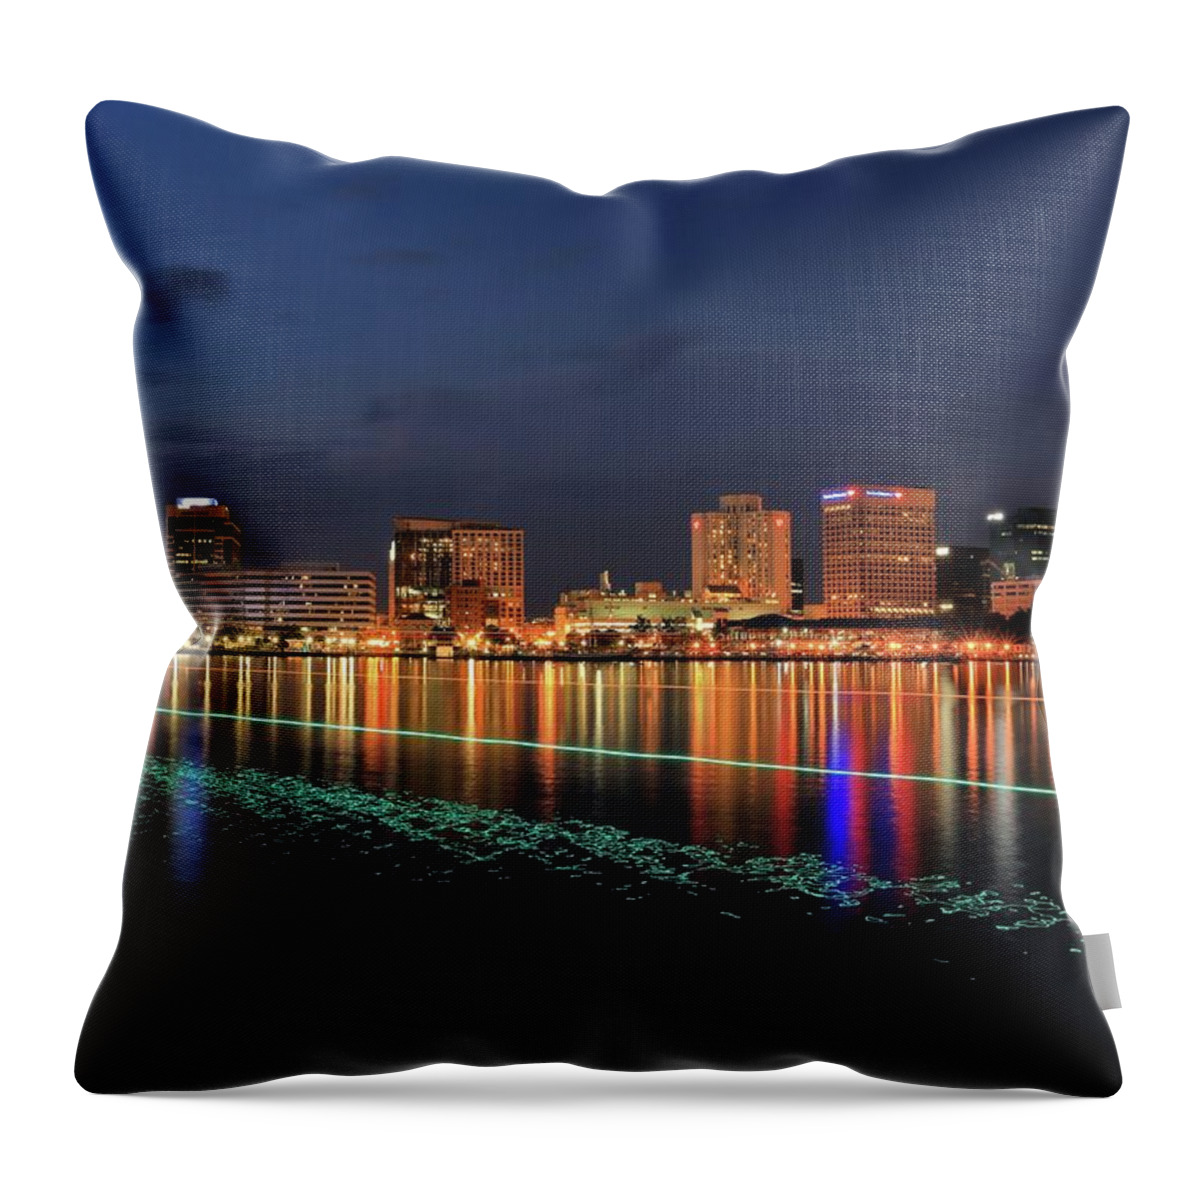 Photosbymch Throw Pillow featuring the photograph Ferry passing by the waterfront by M C Hood